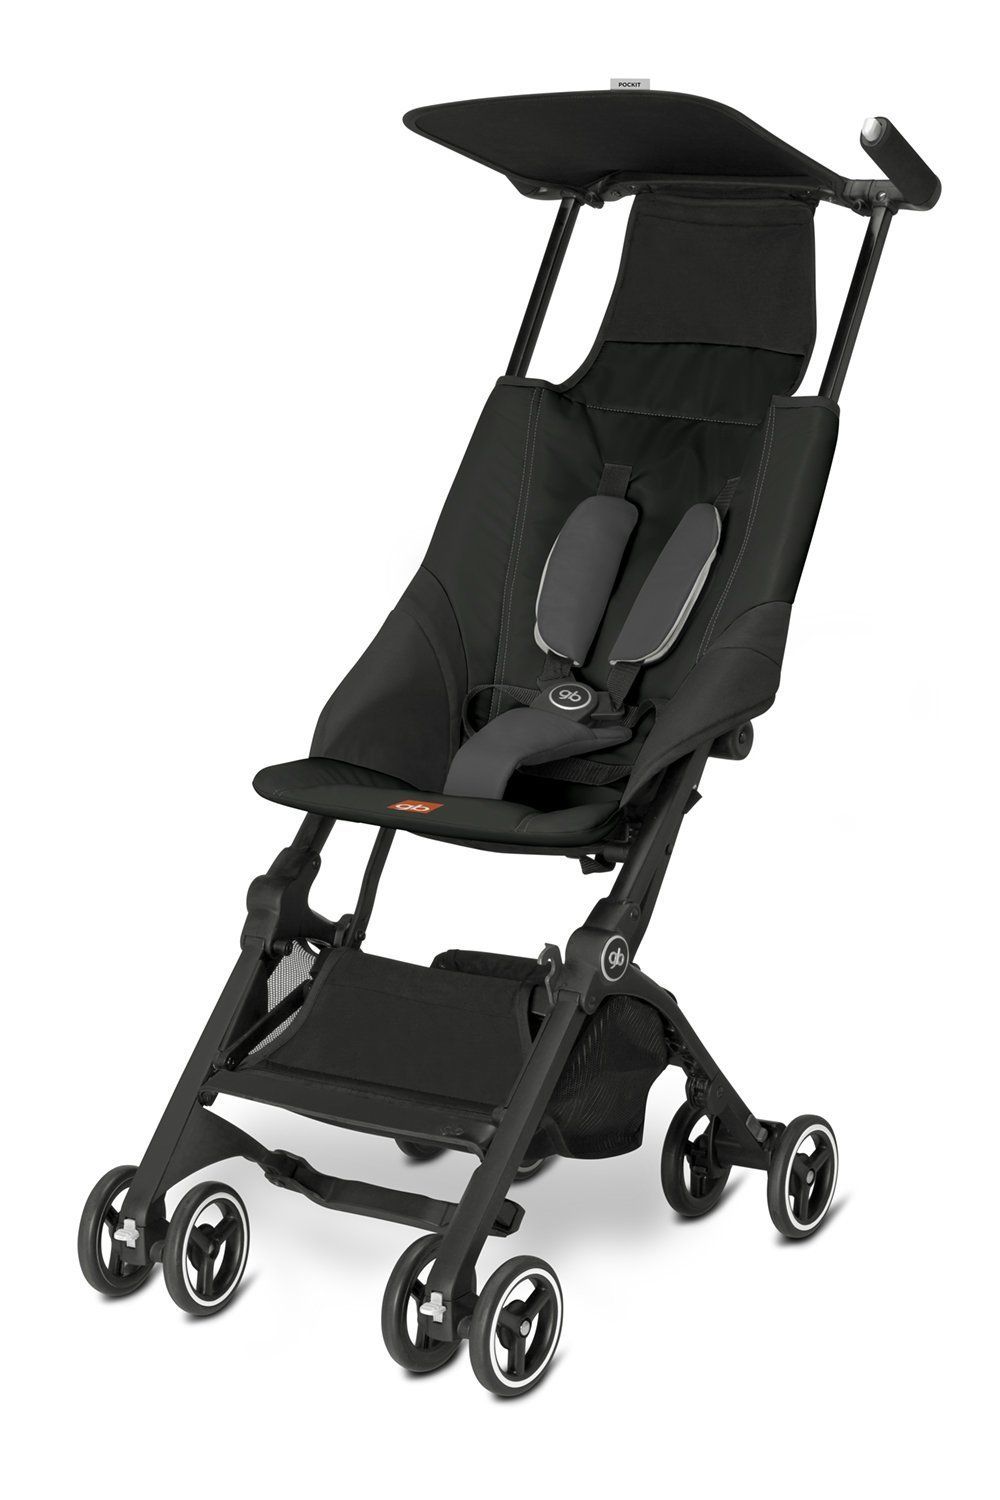 best baby stroller to travel with